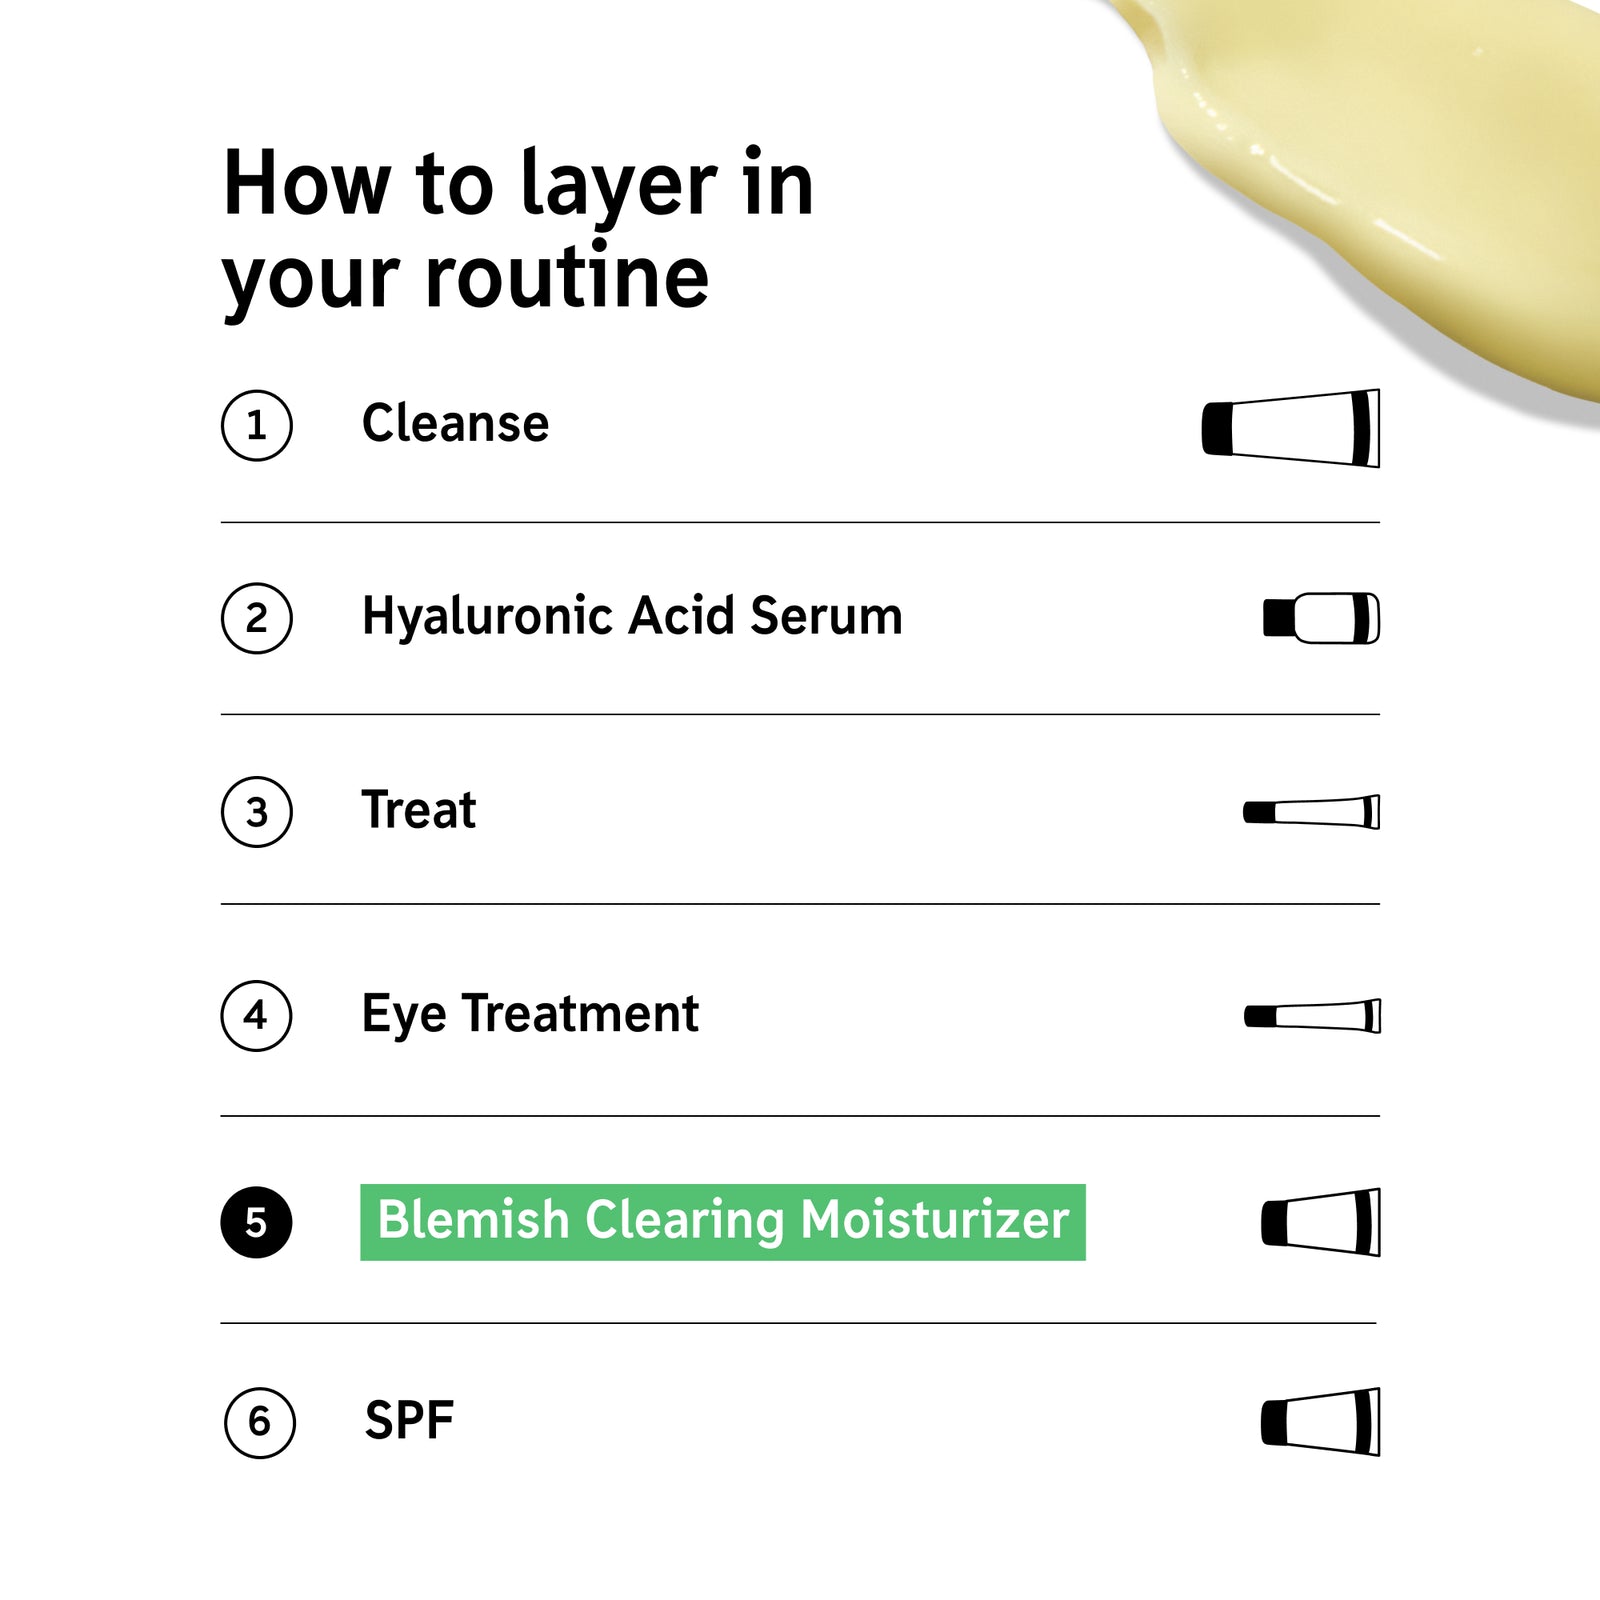 How to layer Blemish Clearing Moisturiser in your routine